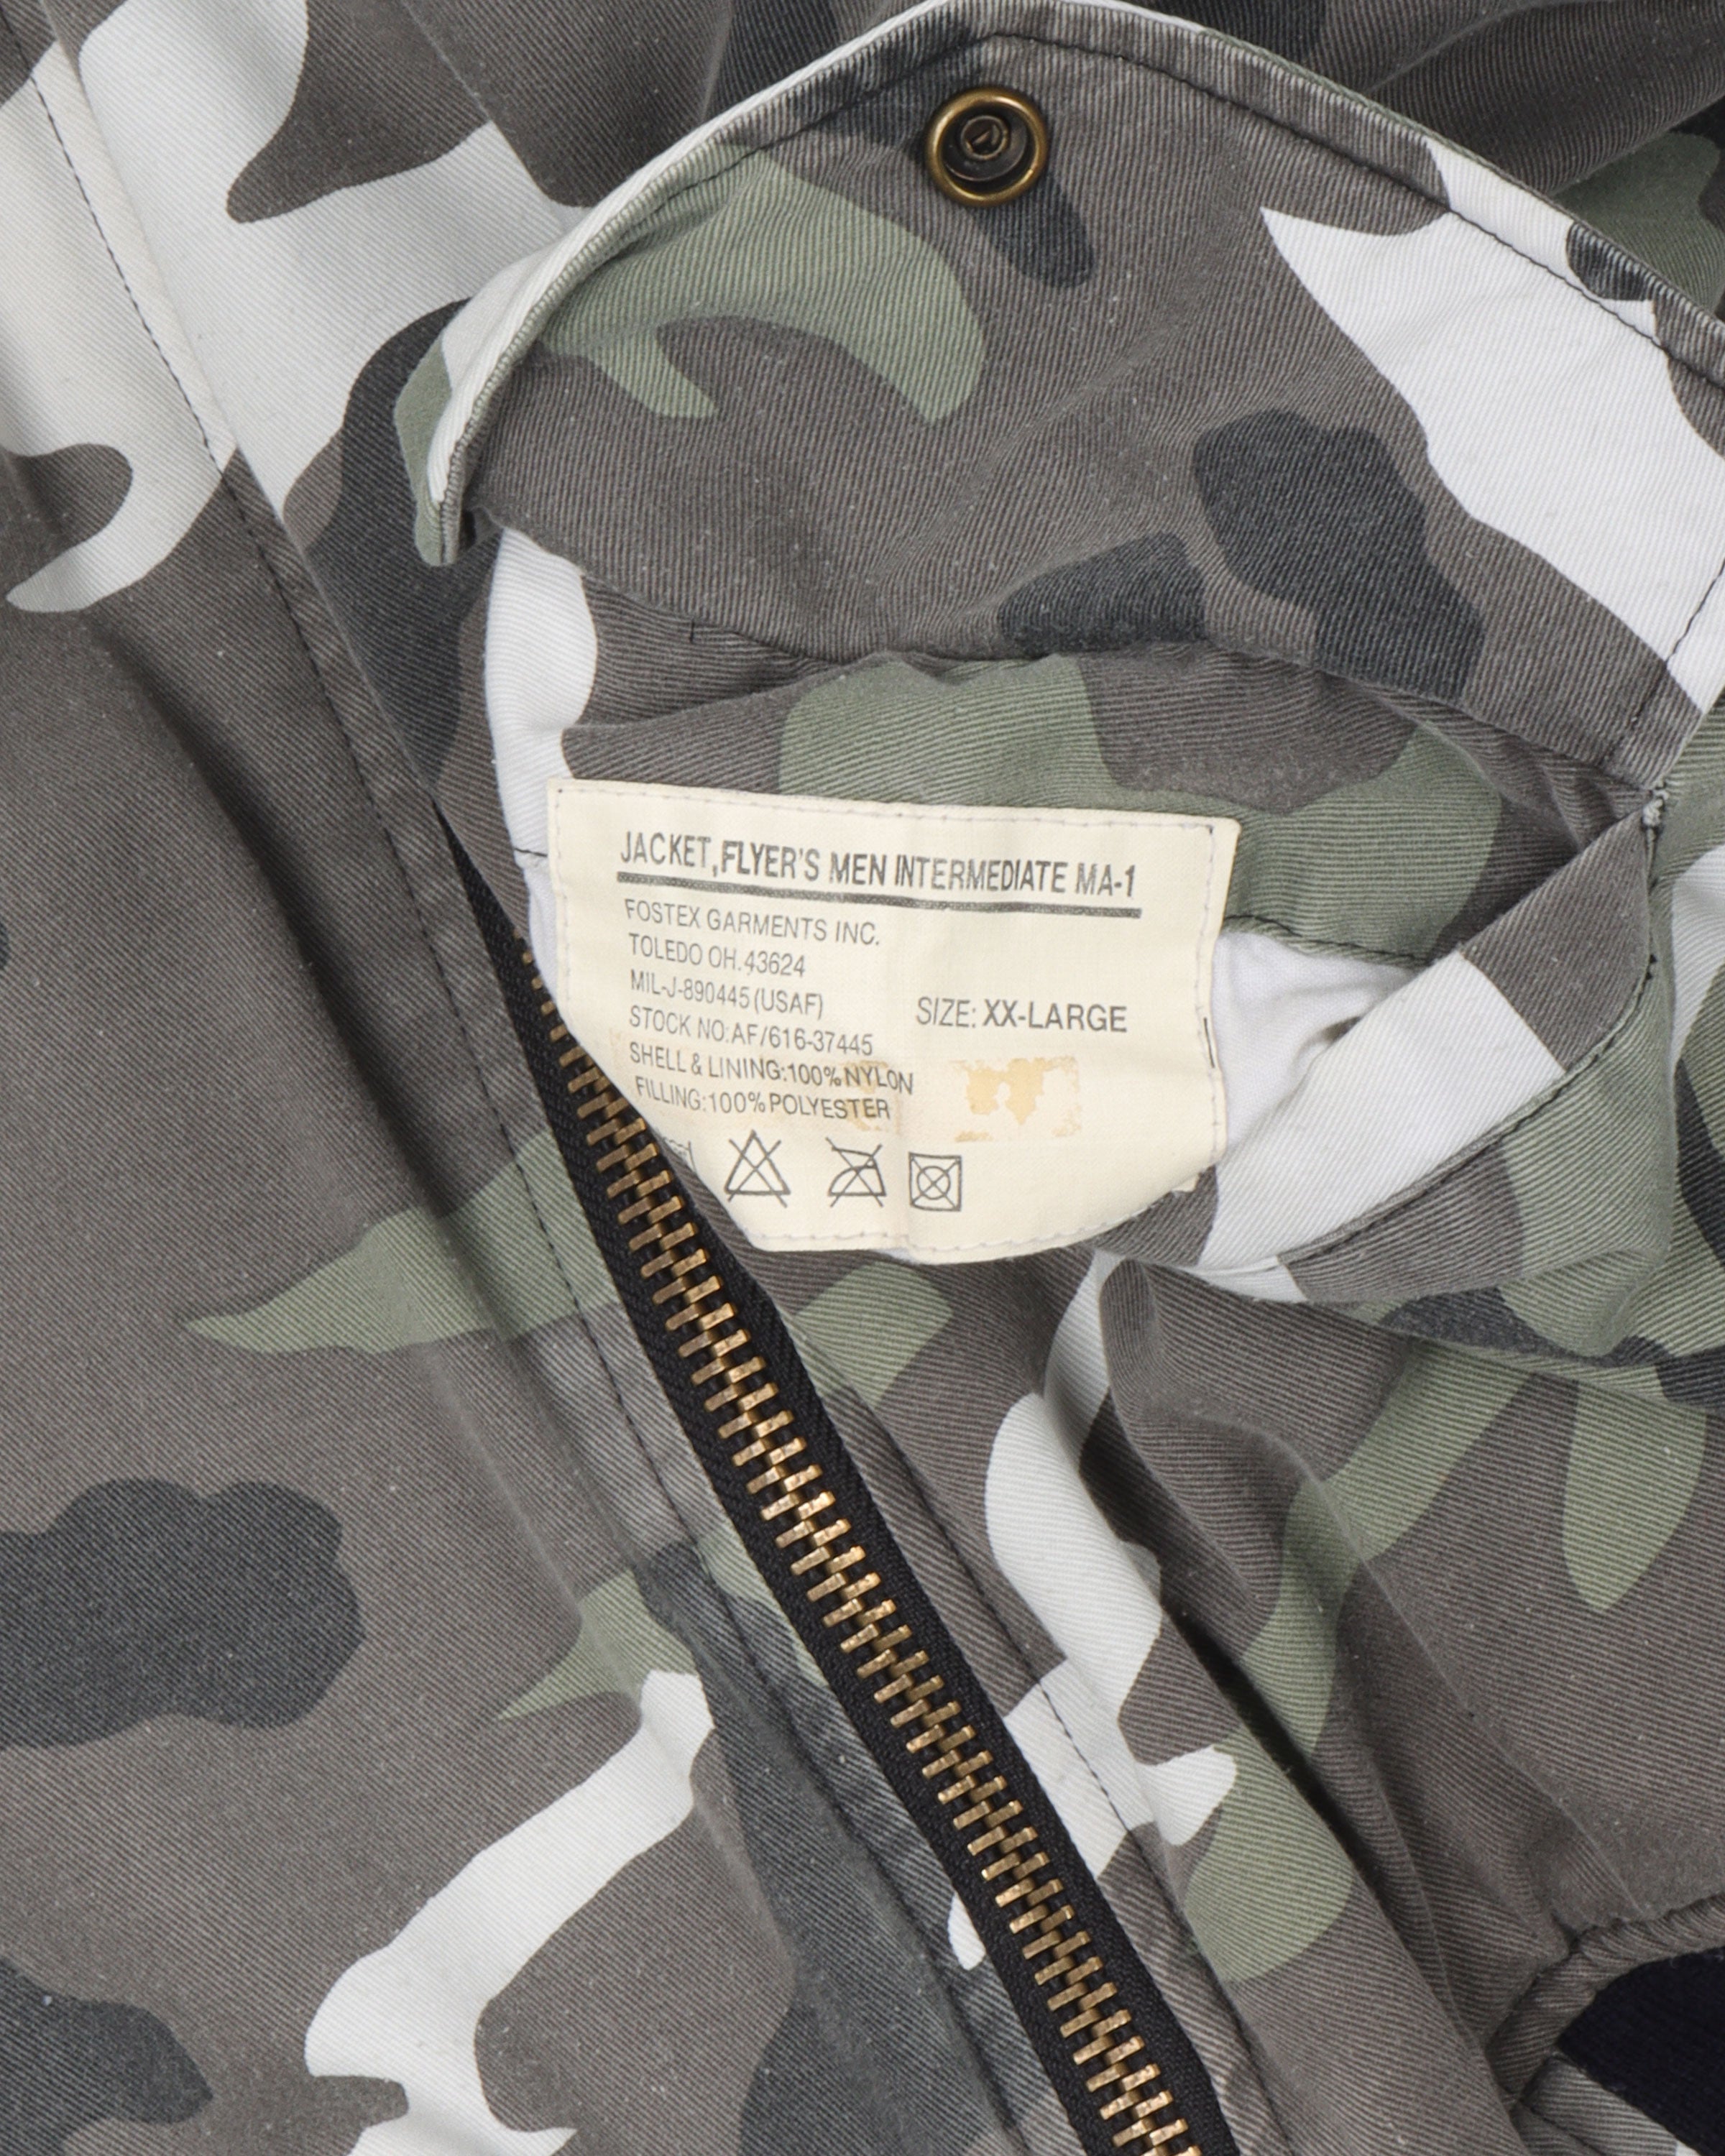 AW01/02 Riot Riot Riot Camouflage Bomber Jacket